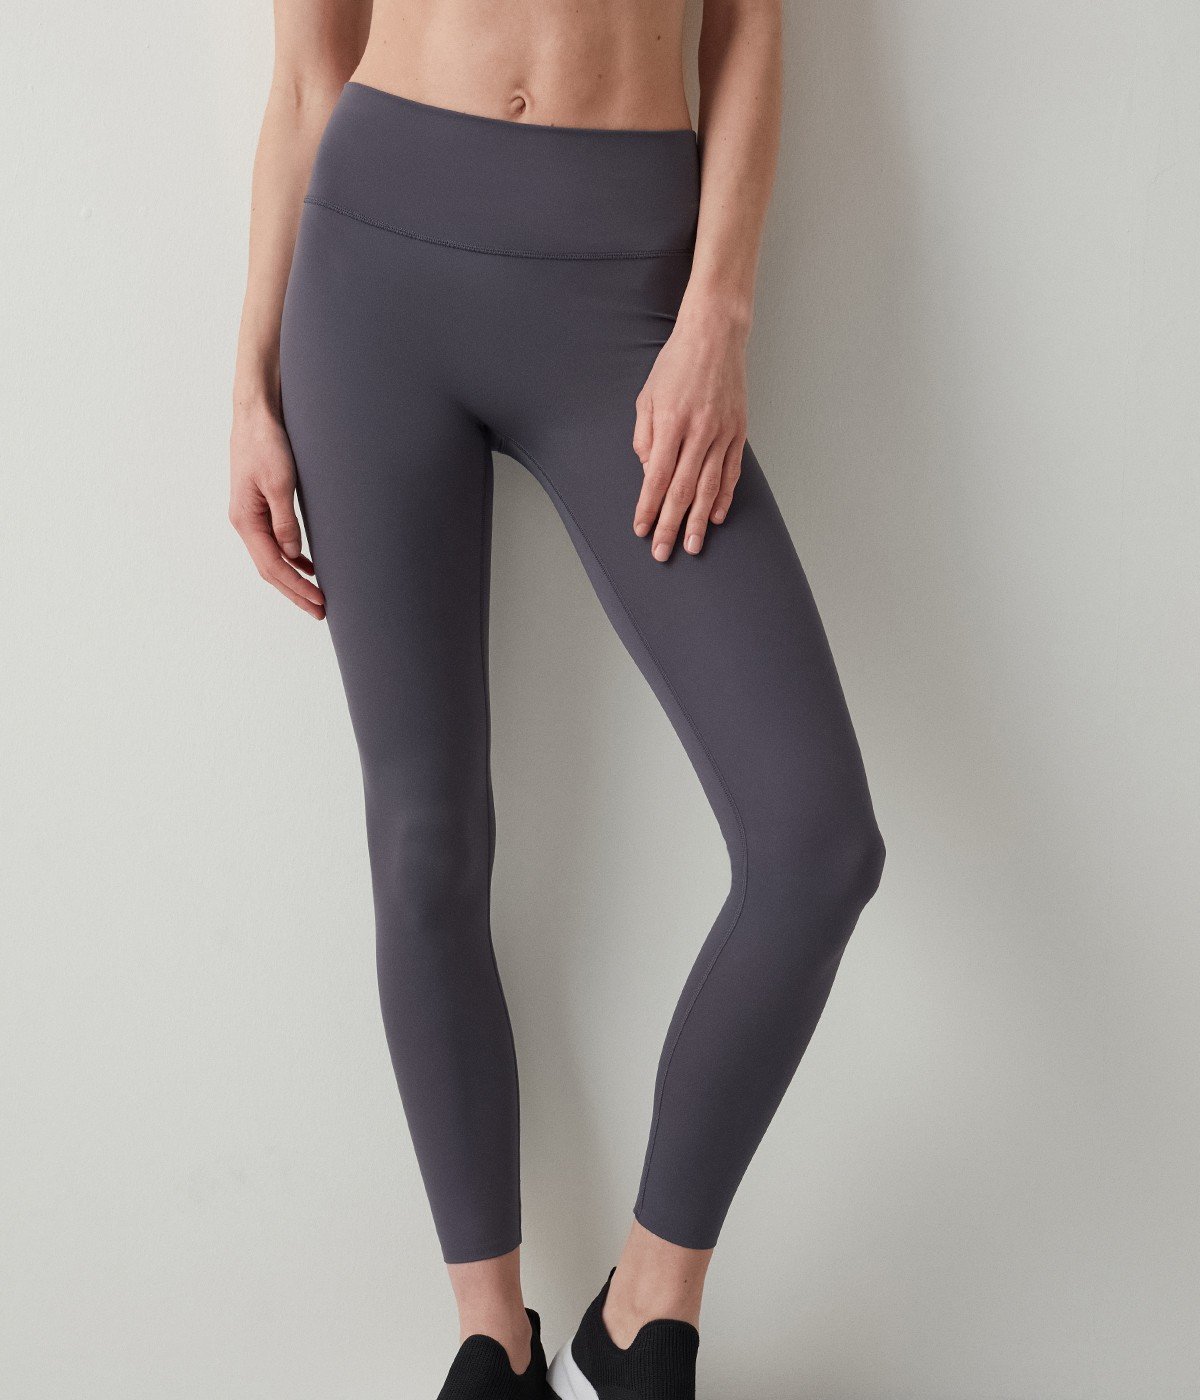 New Miracle Pop Up Legging